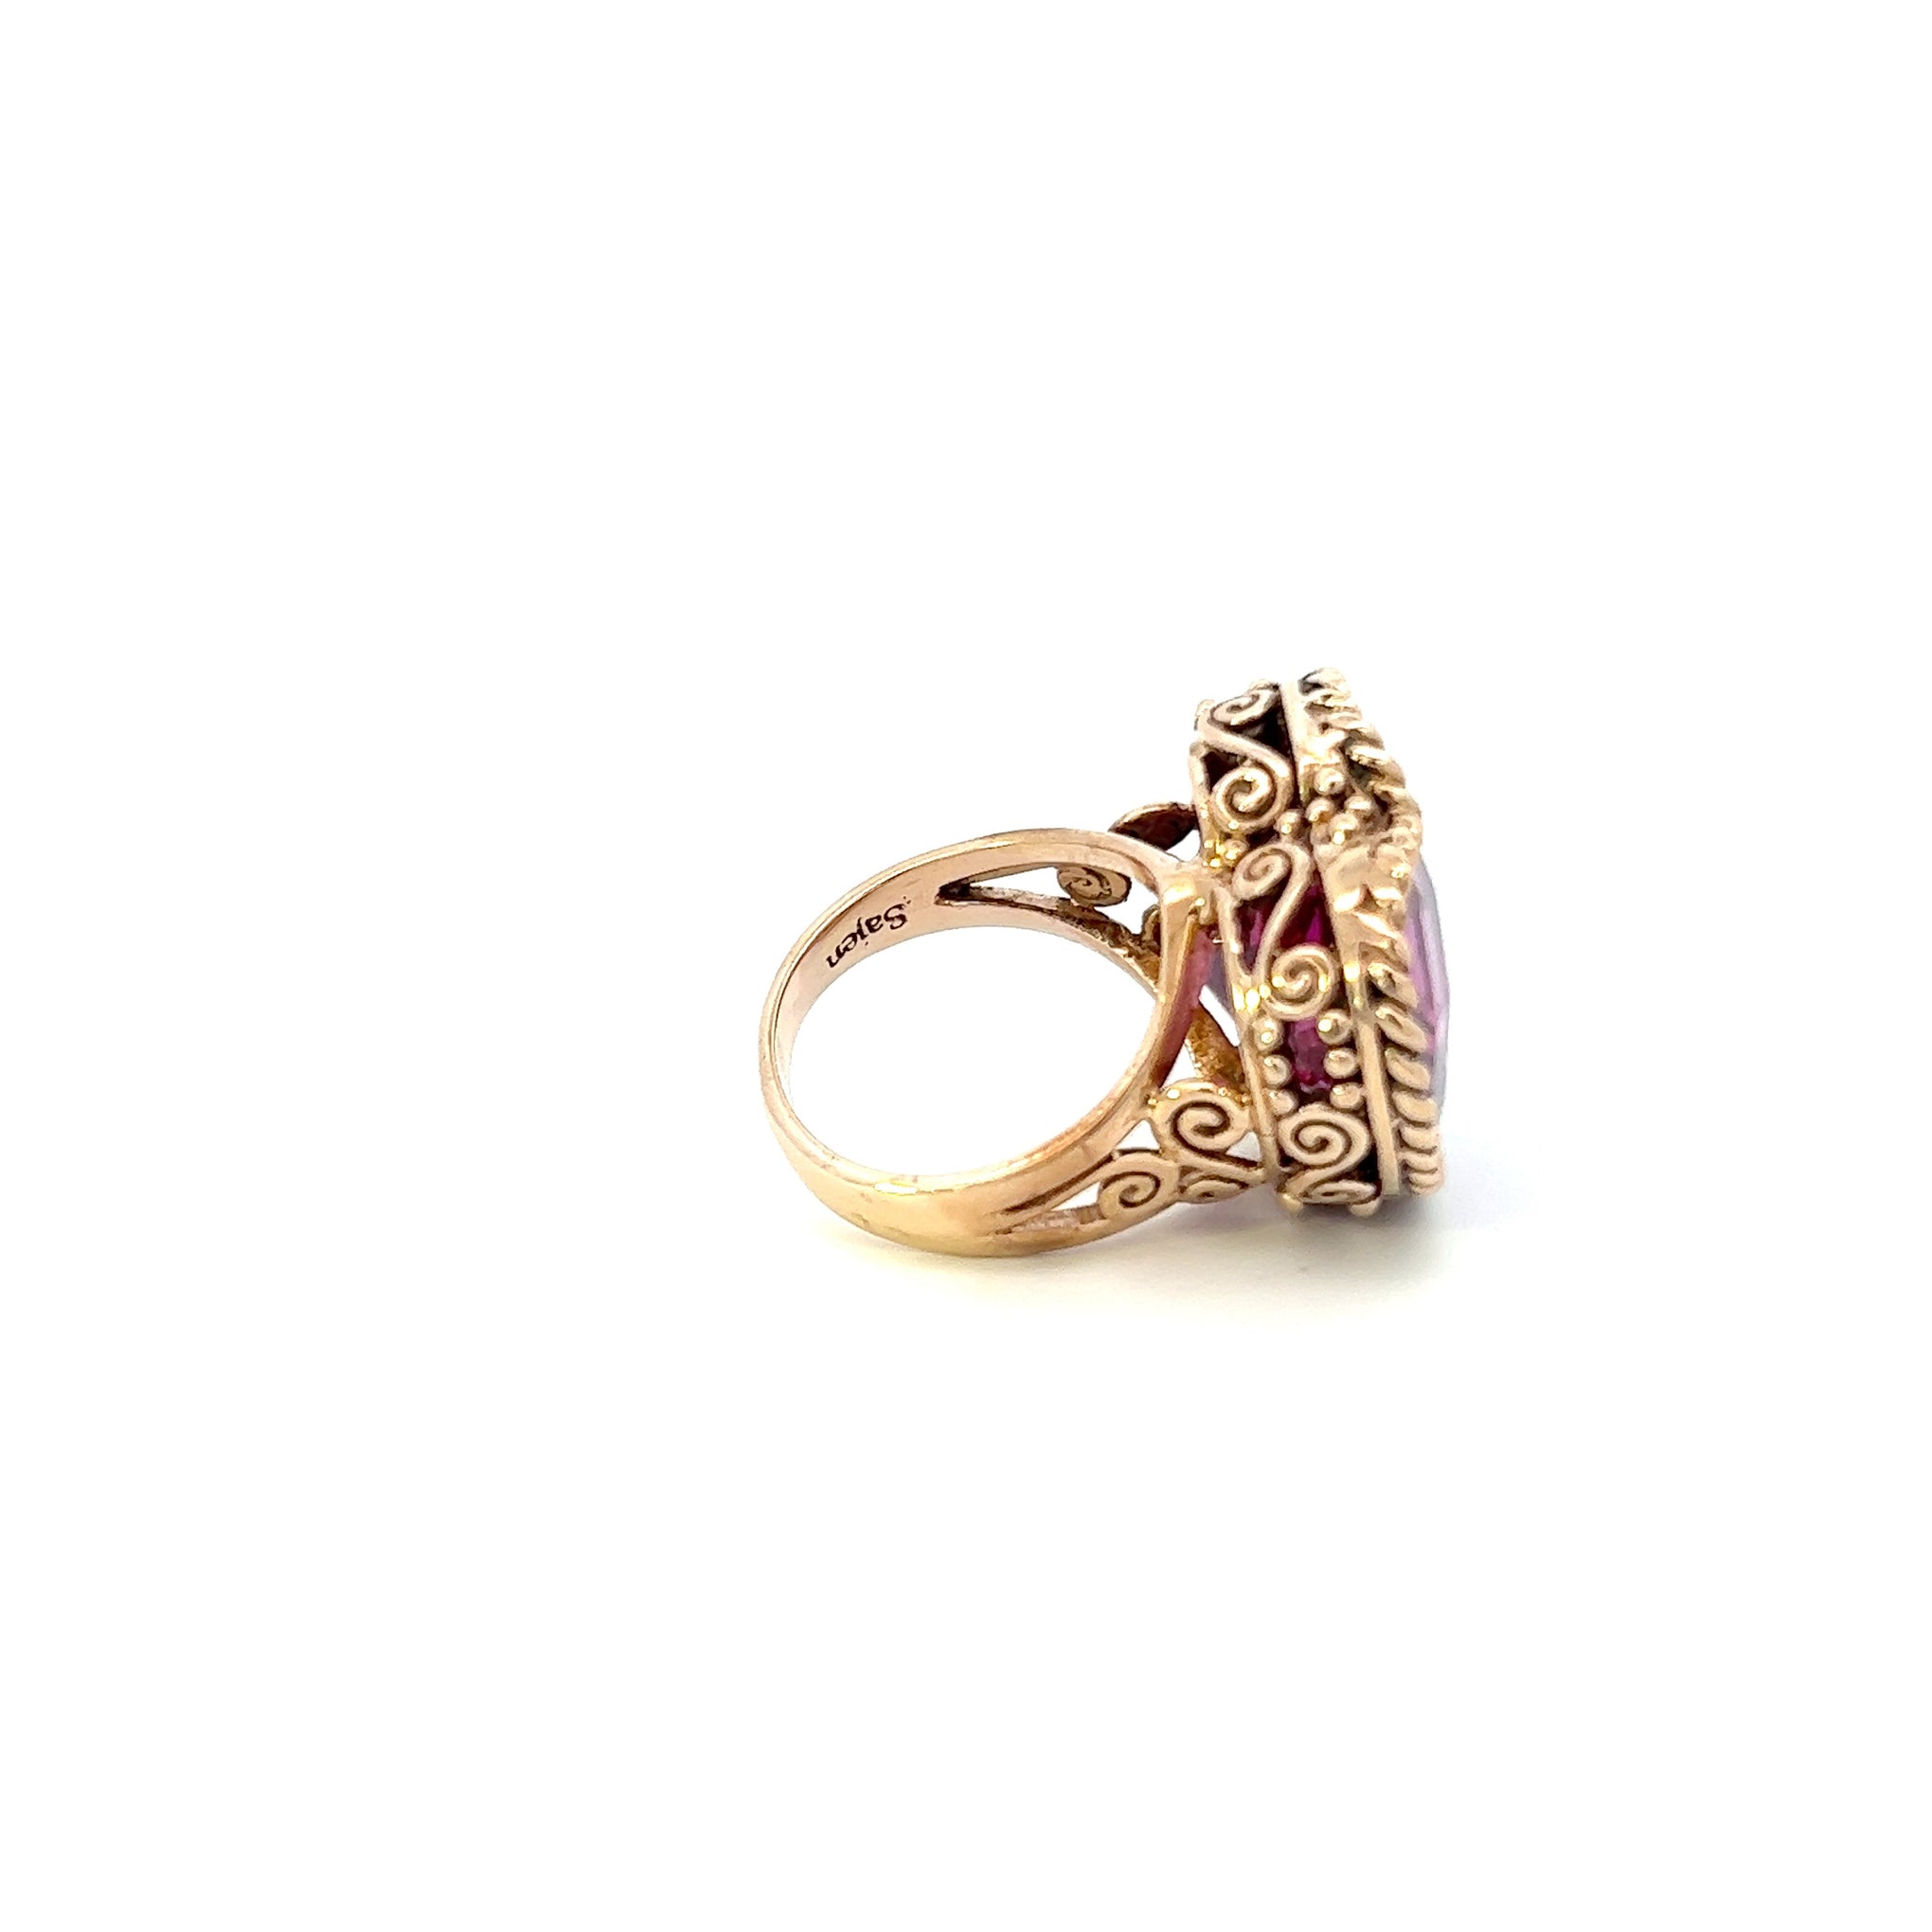 VINTAGE, 14KT YELLOW GOLD AND PINK QUARTZ HEART RING.